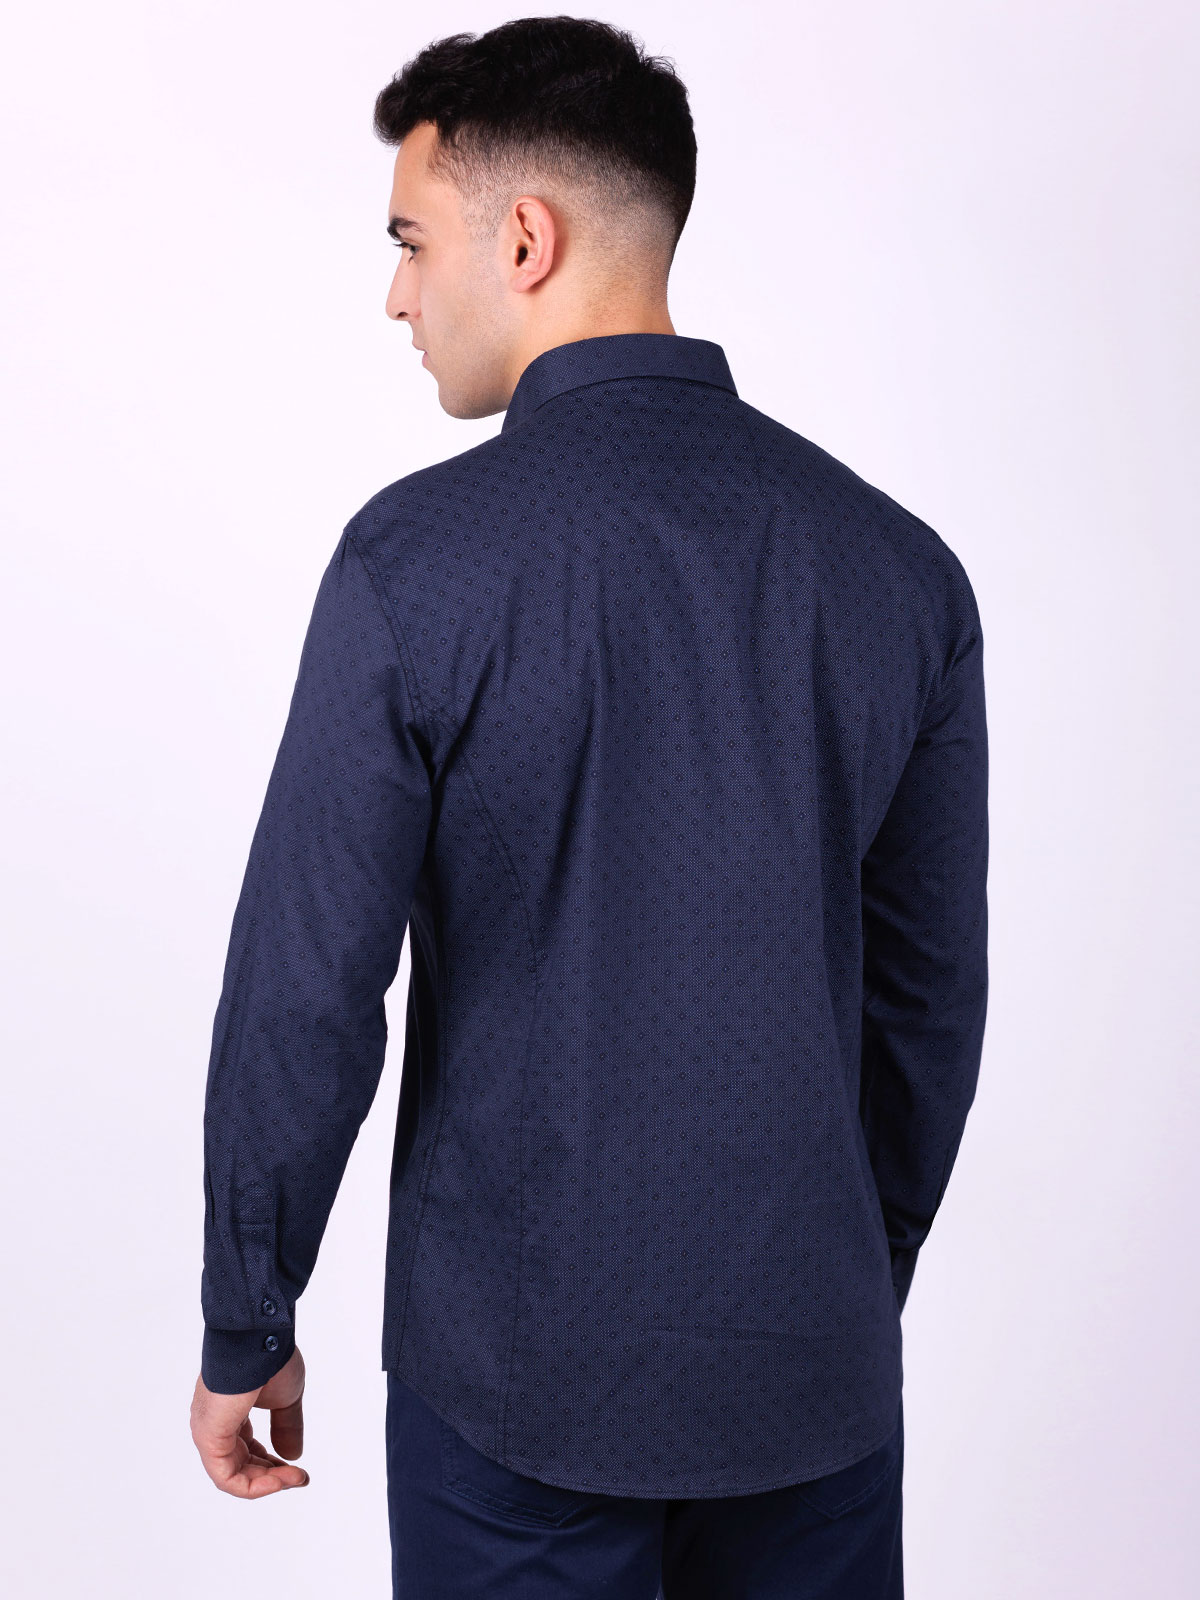 Shirt in dark blue with a figure pattern - 21536 € 43.87 img4